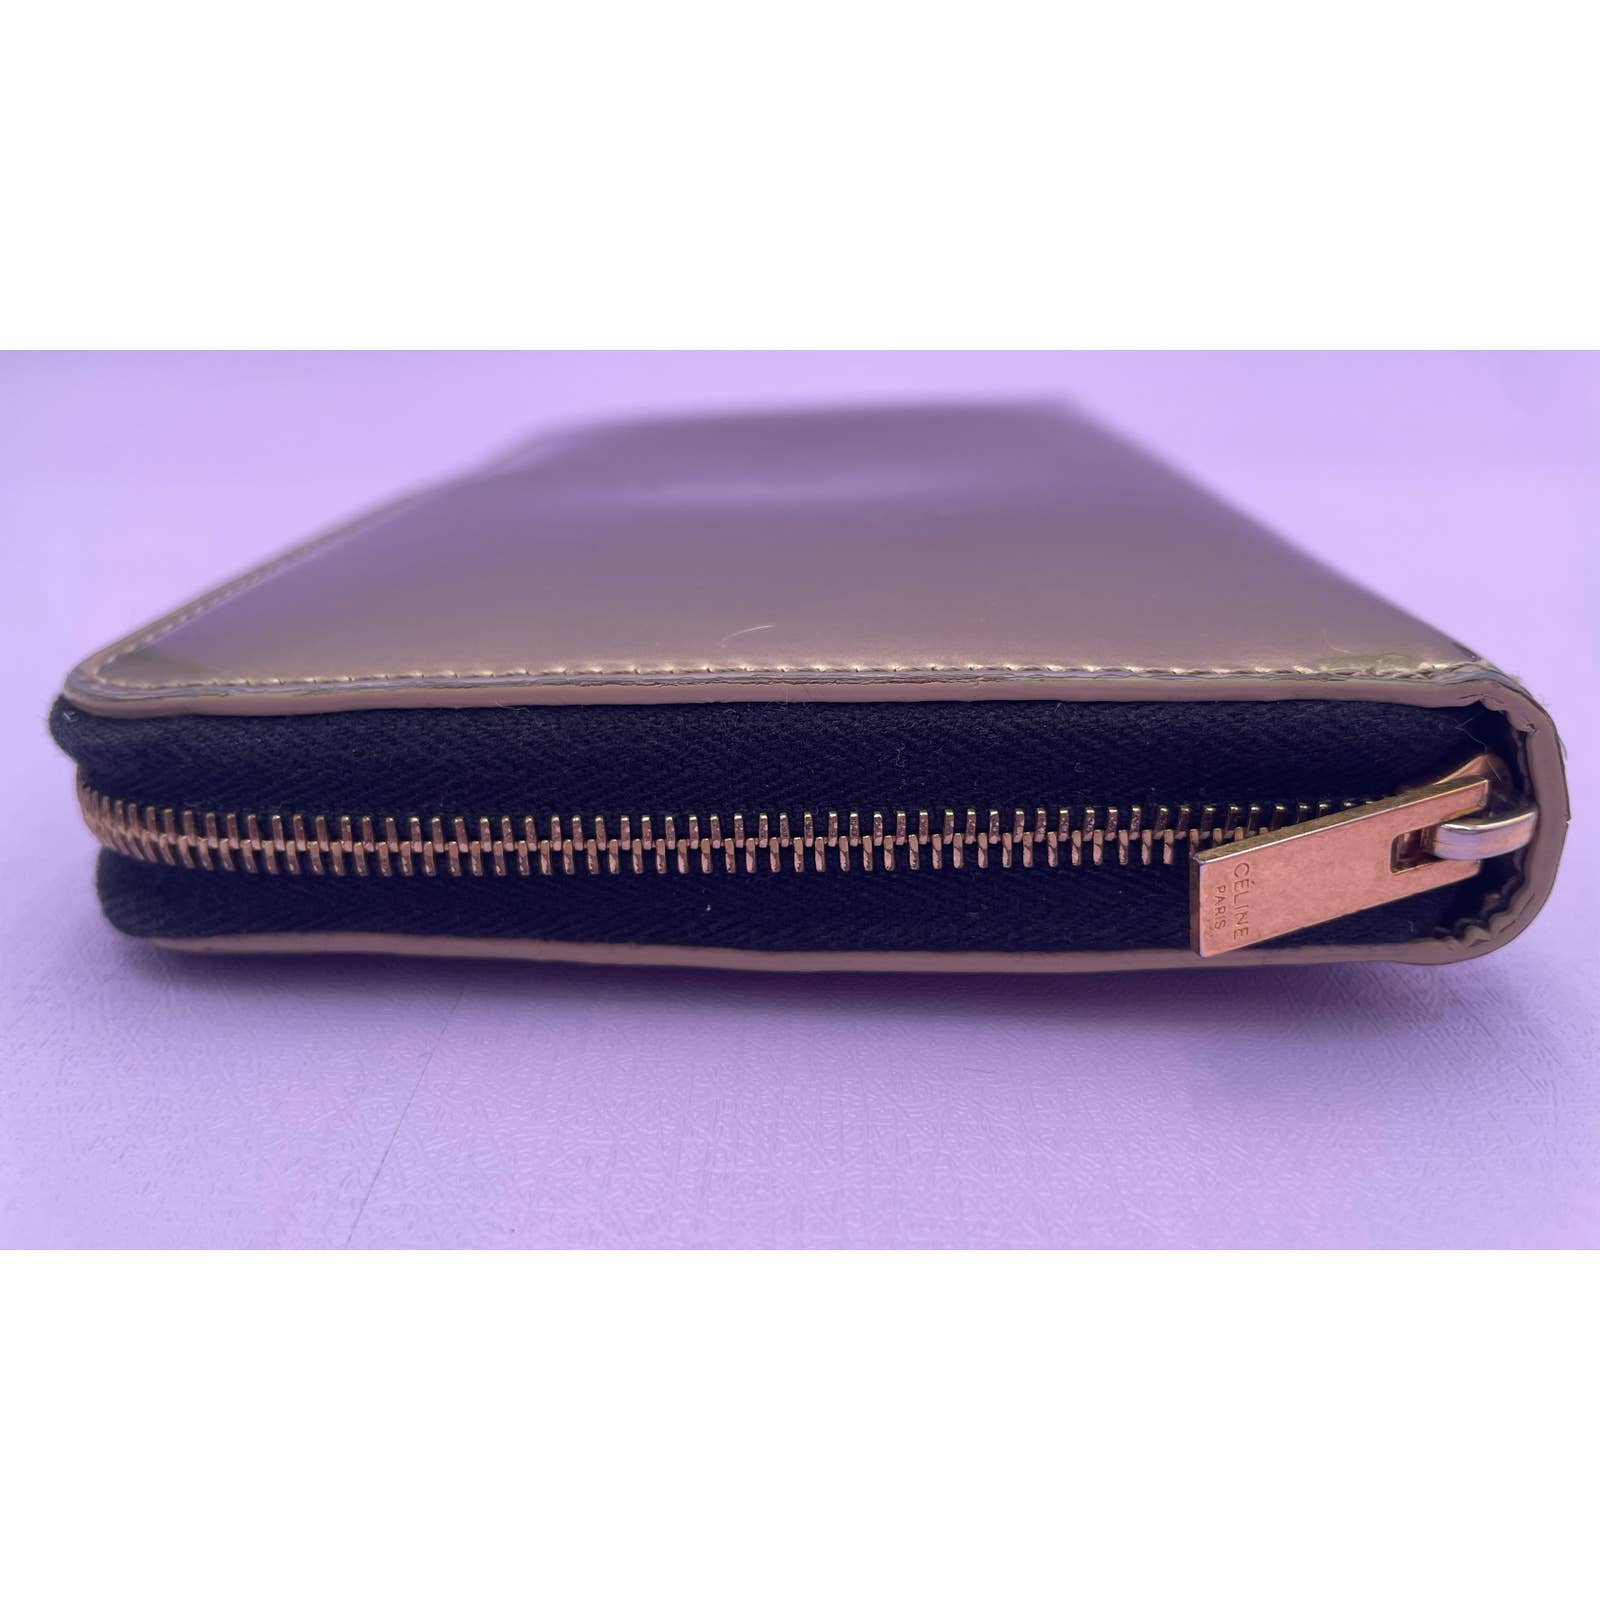 A close-up view of the Celine Alphabet Wallet Gold, made from patent leather, positioned horizontally with the zipper closure slightly open. The wallet is dark with a golden zipper and laid on a light purple surface.